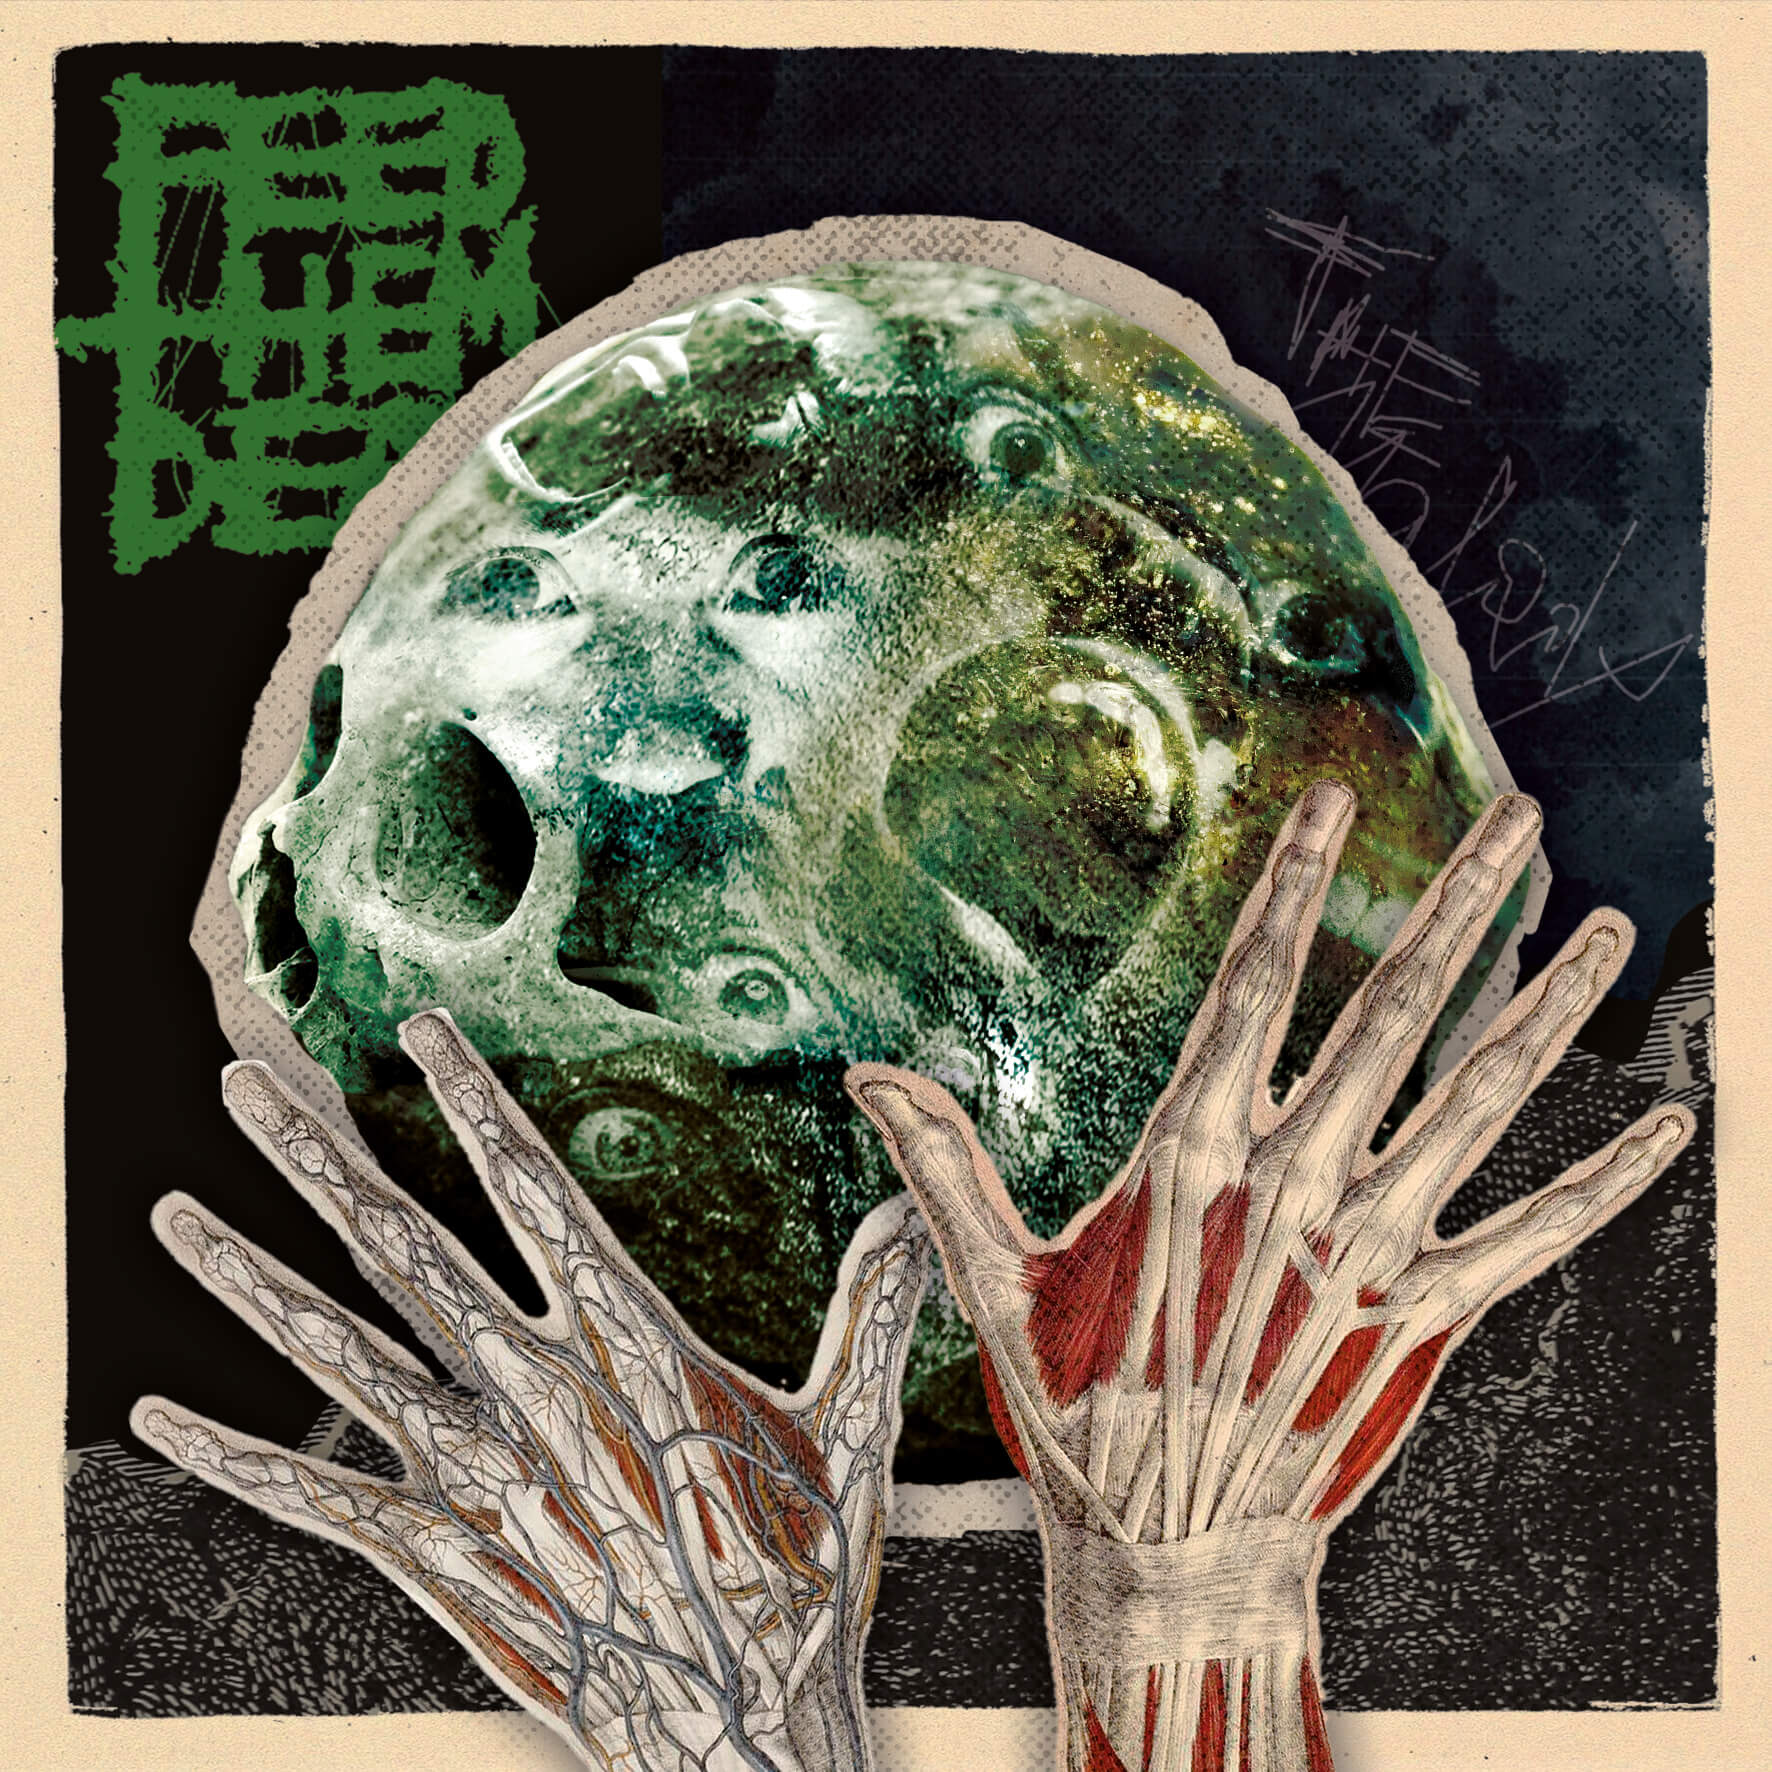 FEED THEM DEATH: No Clean Singing premieres “Deleterious” single from Italian death-grind purveyors, new album “The Malady” out in June